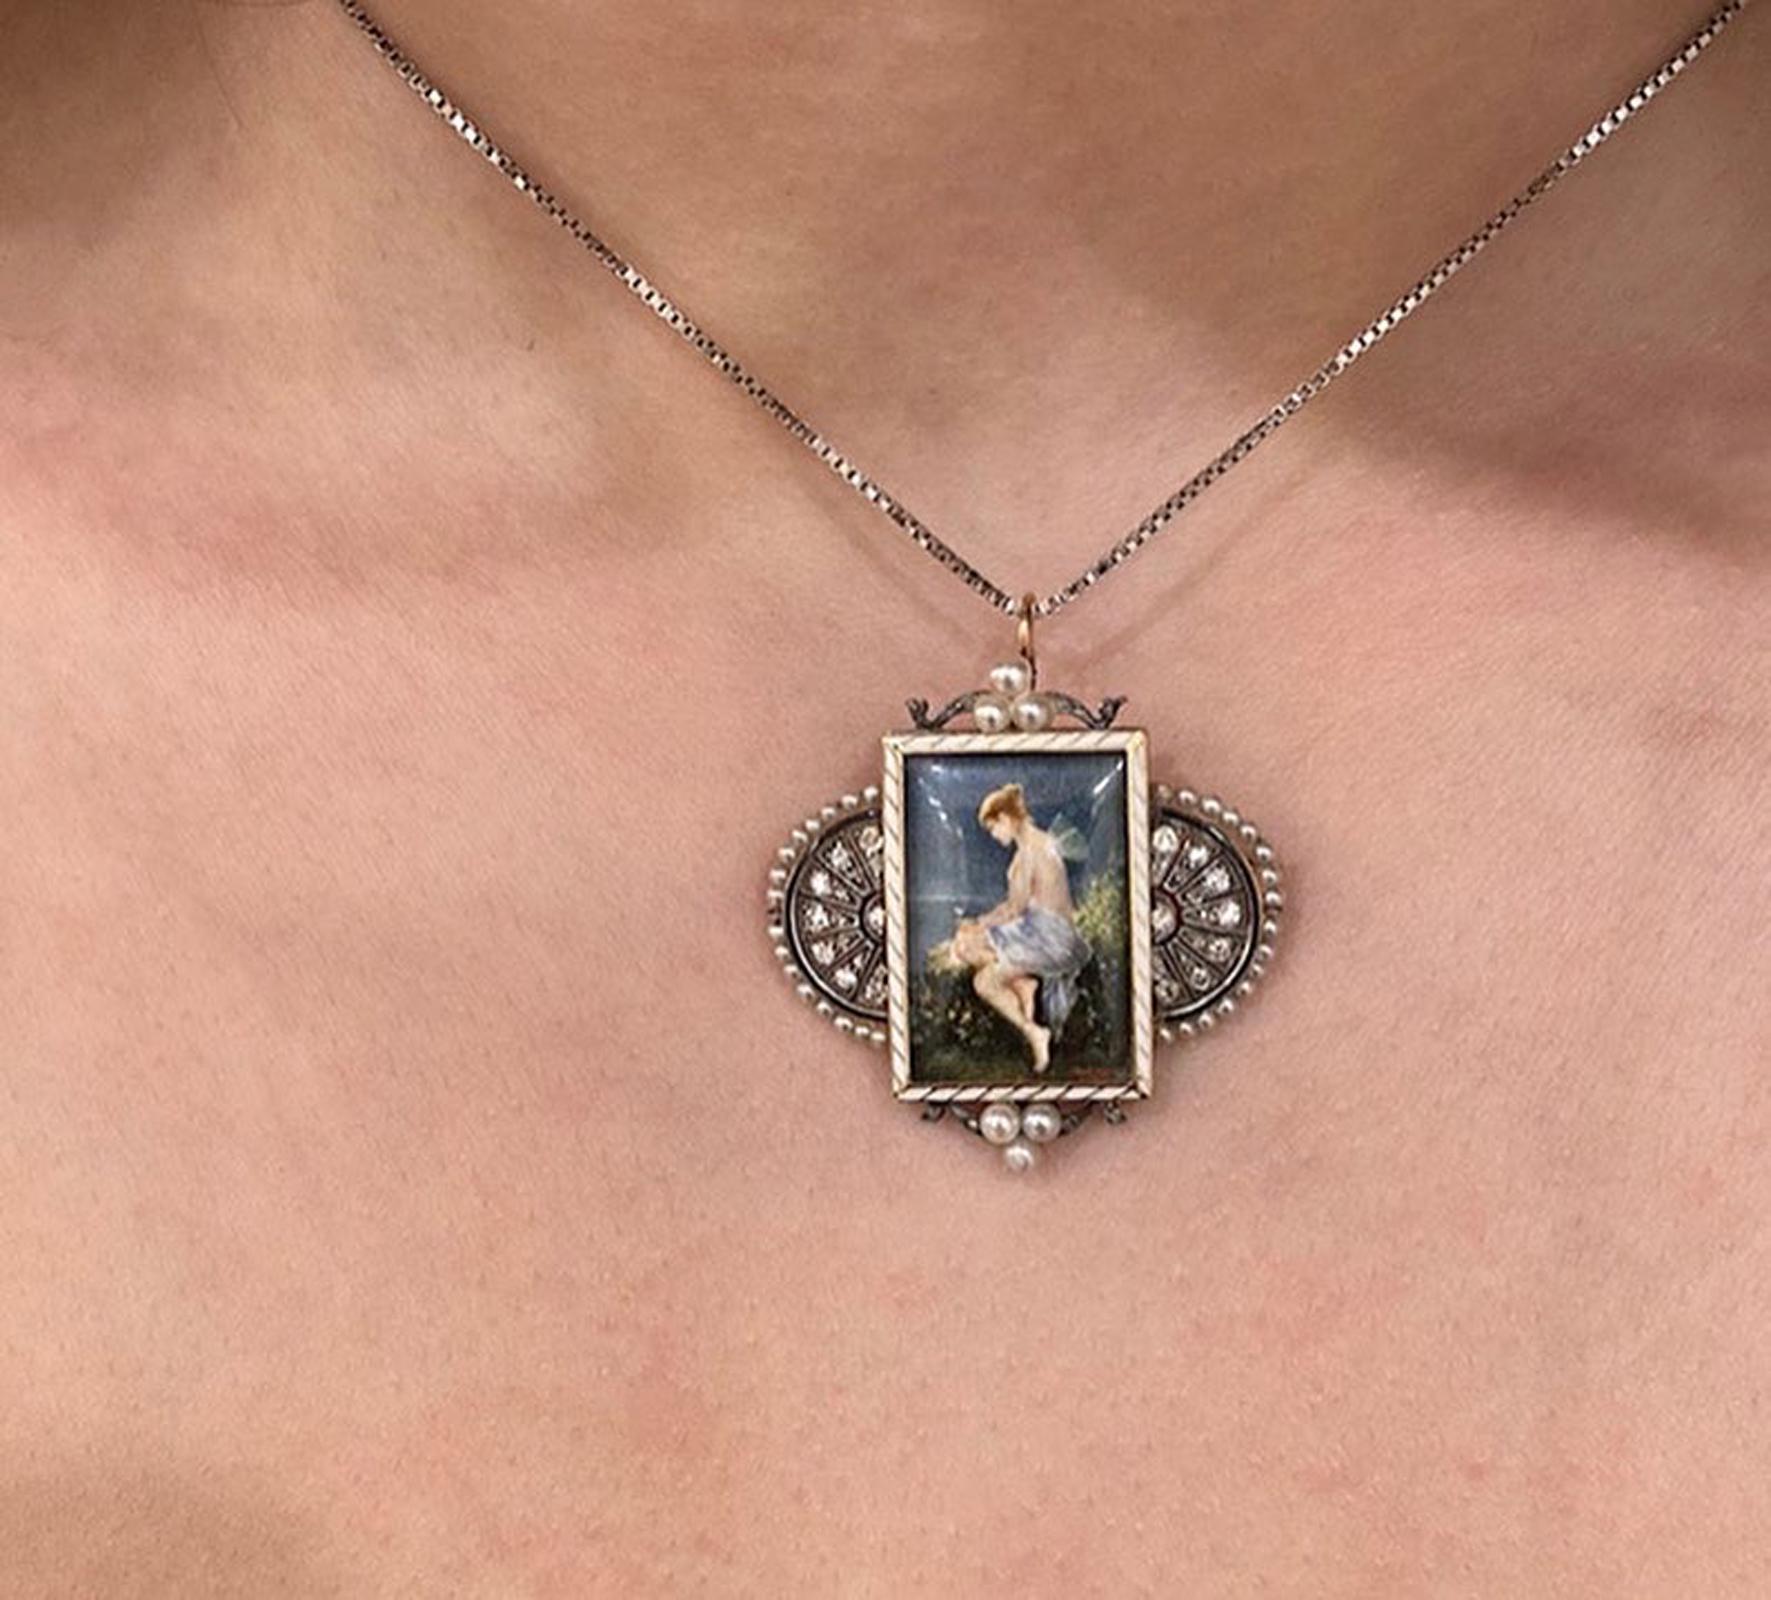 Austria, c. 1905

This delicate antique Jugendstil (Art Nouveau) pendant / brooch features a glazed miniature painting on bone after Wilhelm Kray’s Psyche with a Butterfly on the Seashore. The miniature is set in a white enamel, 14K gold, silver,